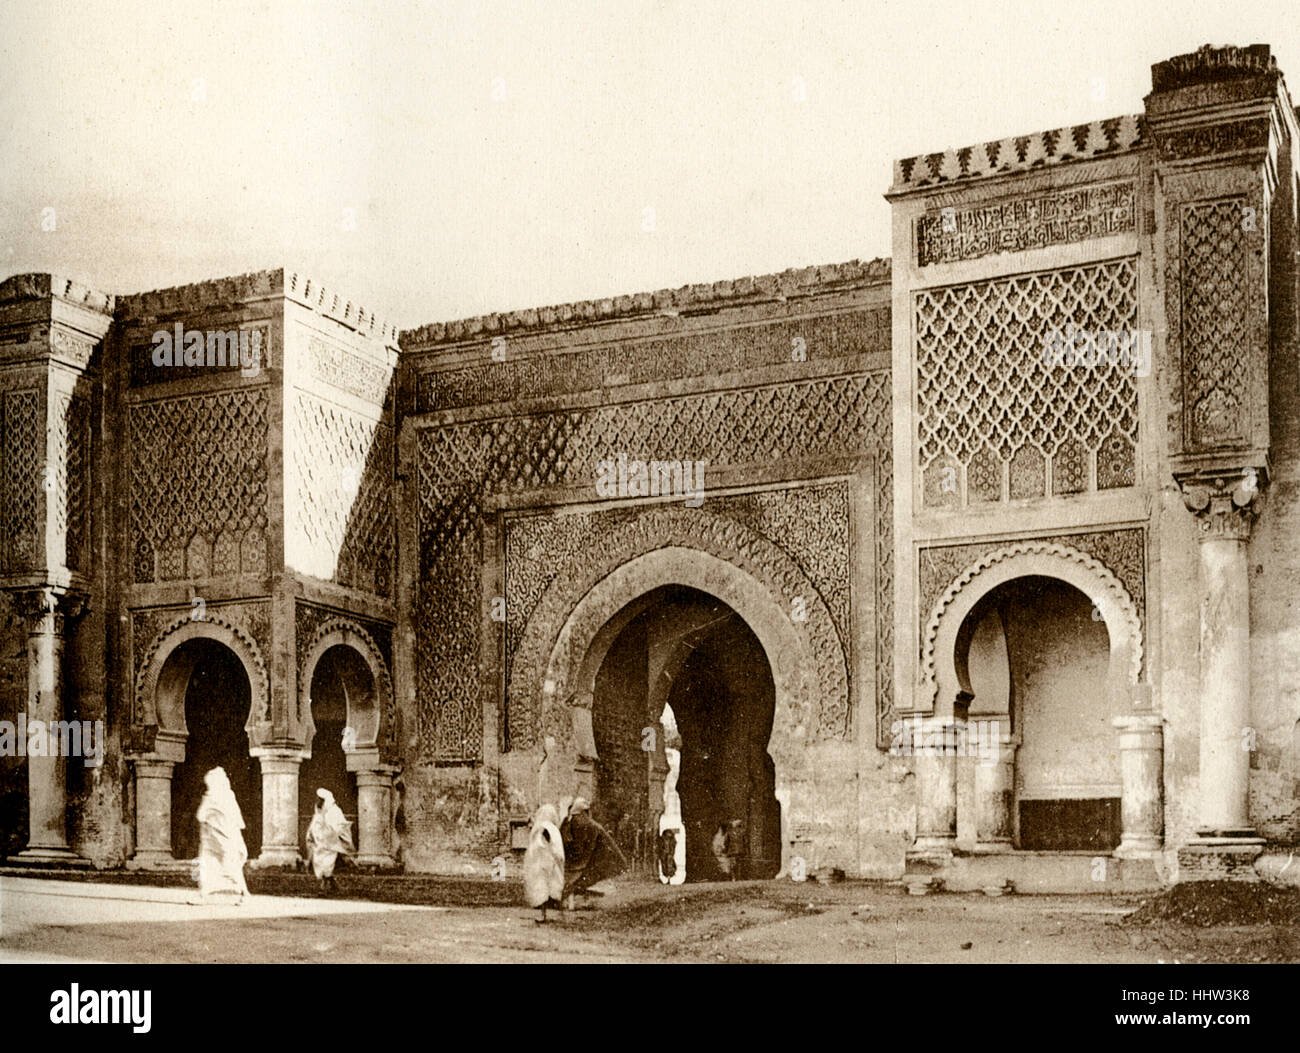 Meknes. People in front of the Gate of Bab-Mansour-El-Alluj / Bab Mansour el-Aleuj  / Porte du Renéga. completed in 1732 by Stock Photo - Alamy